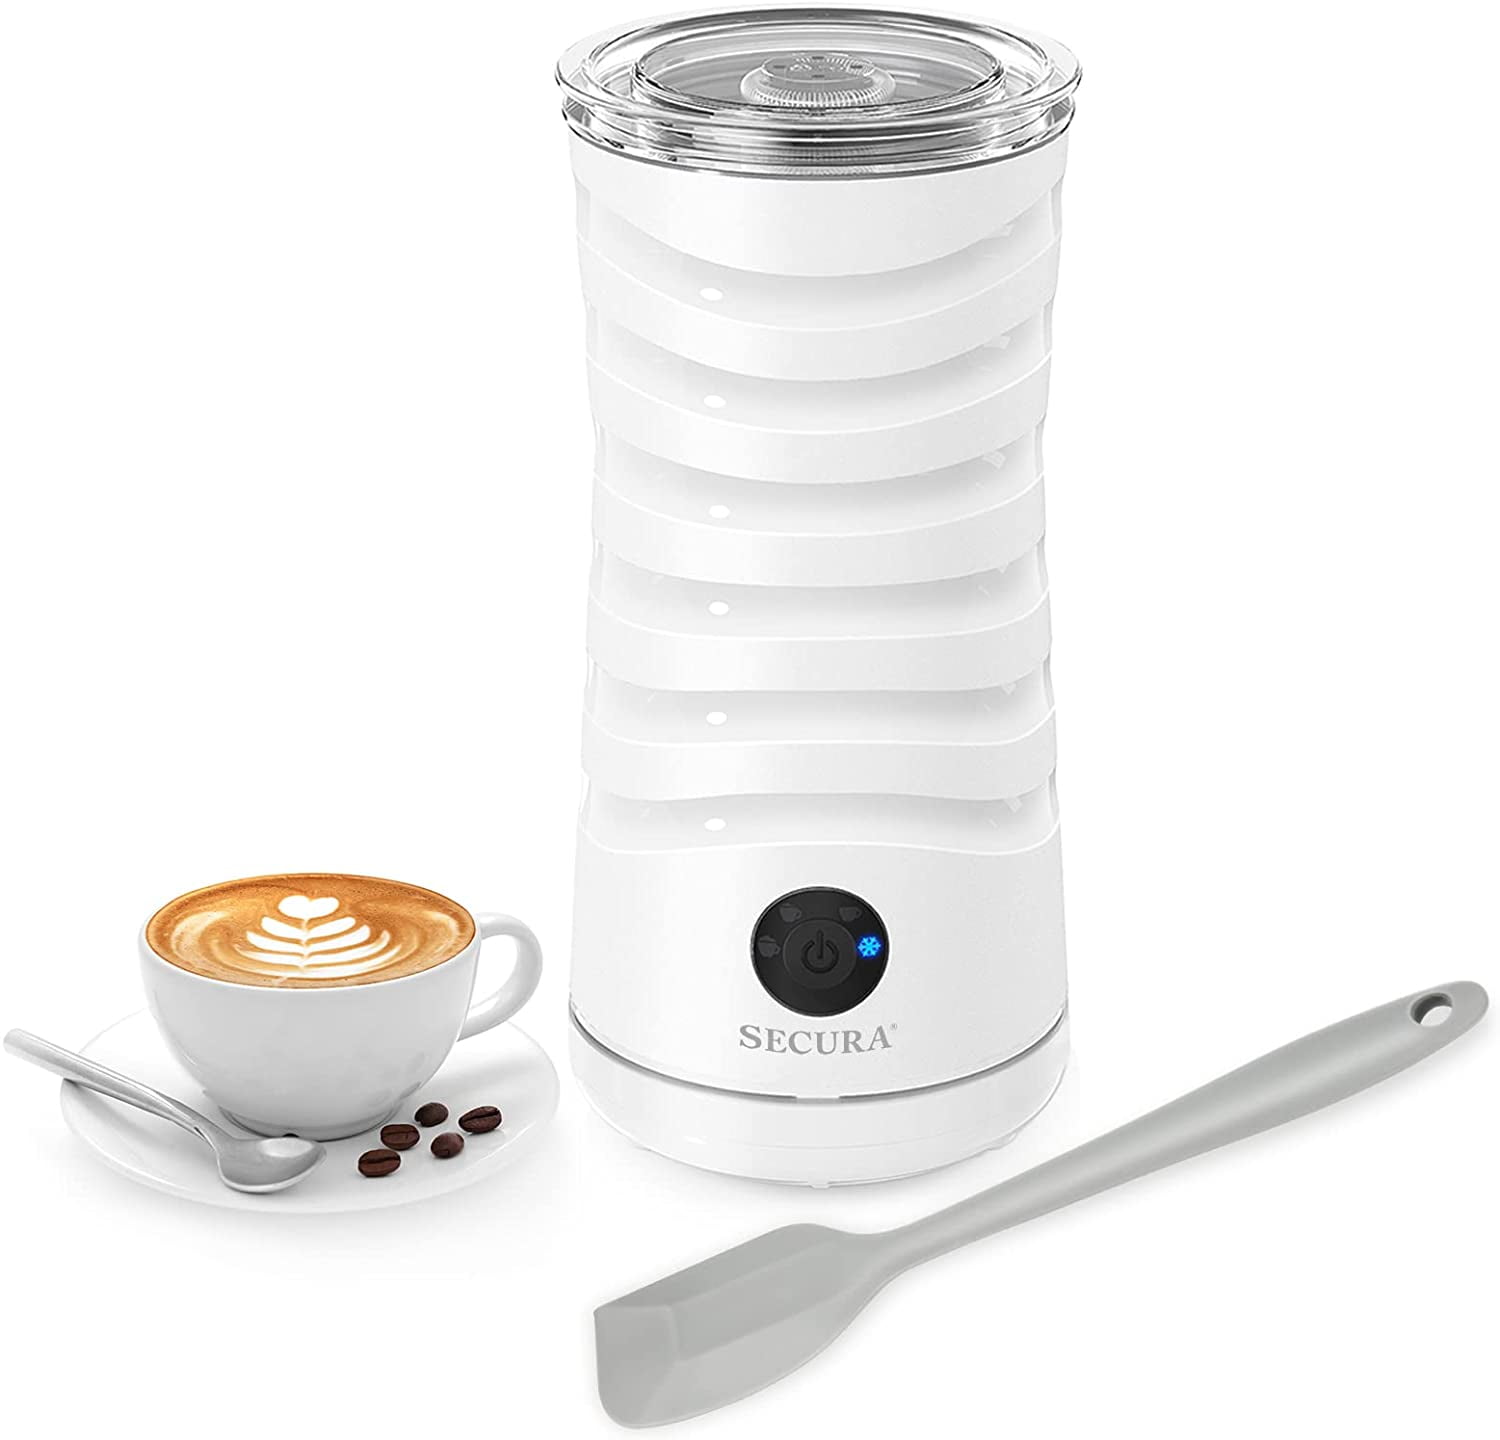 Secura Electric Milk Frother, Automatic Milk Steamer Warm or Cold Foam  Maker for Coffee, Cappuccino, Latte, Stainless Steel Milk Warmer with Strix  Temperature Controls - The Secura